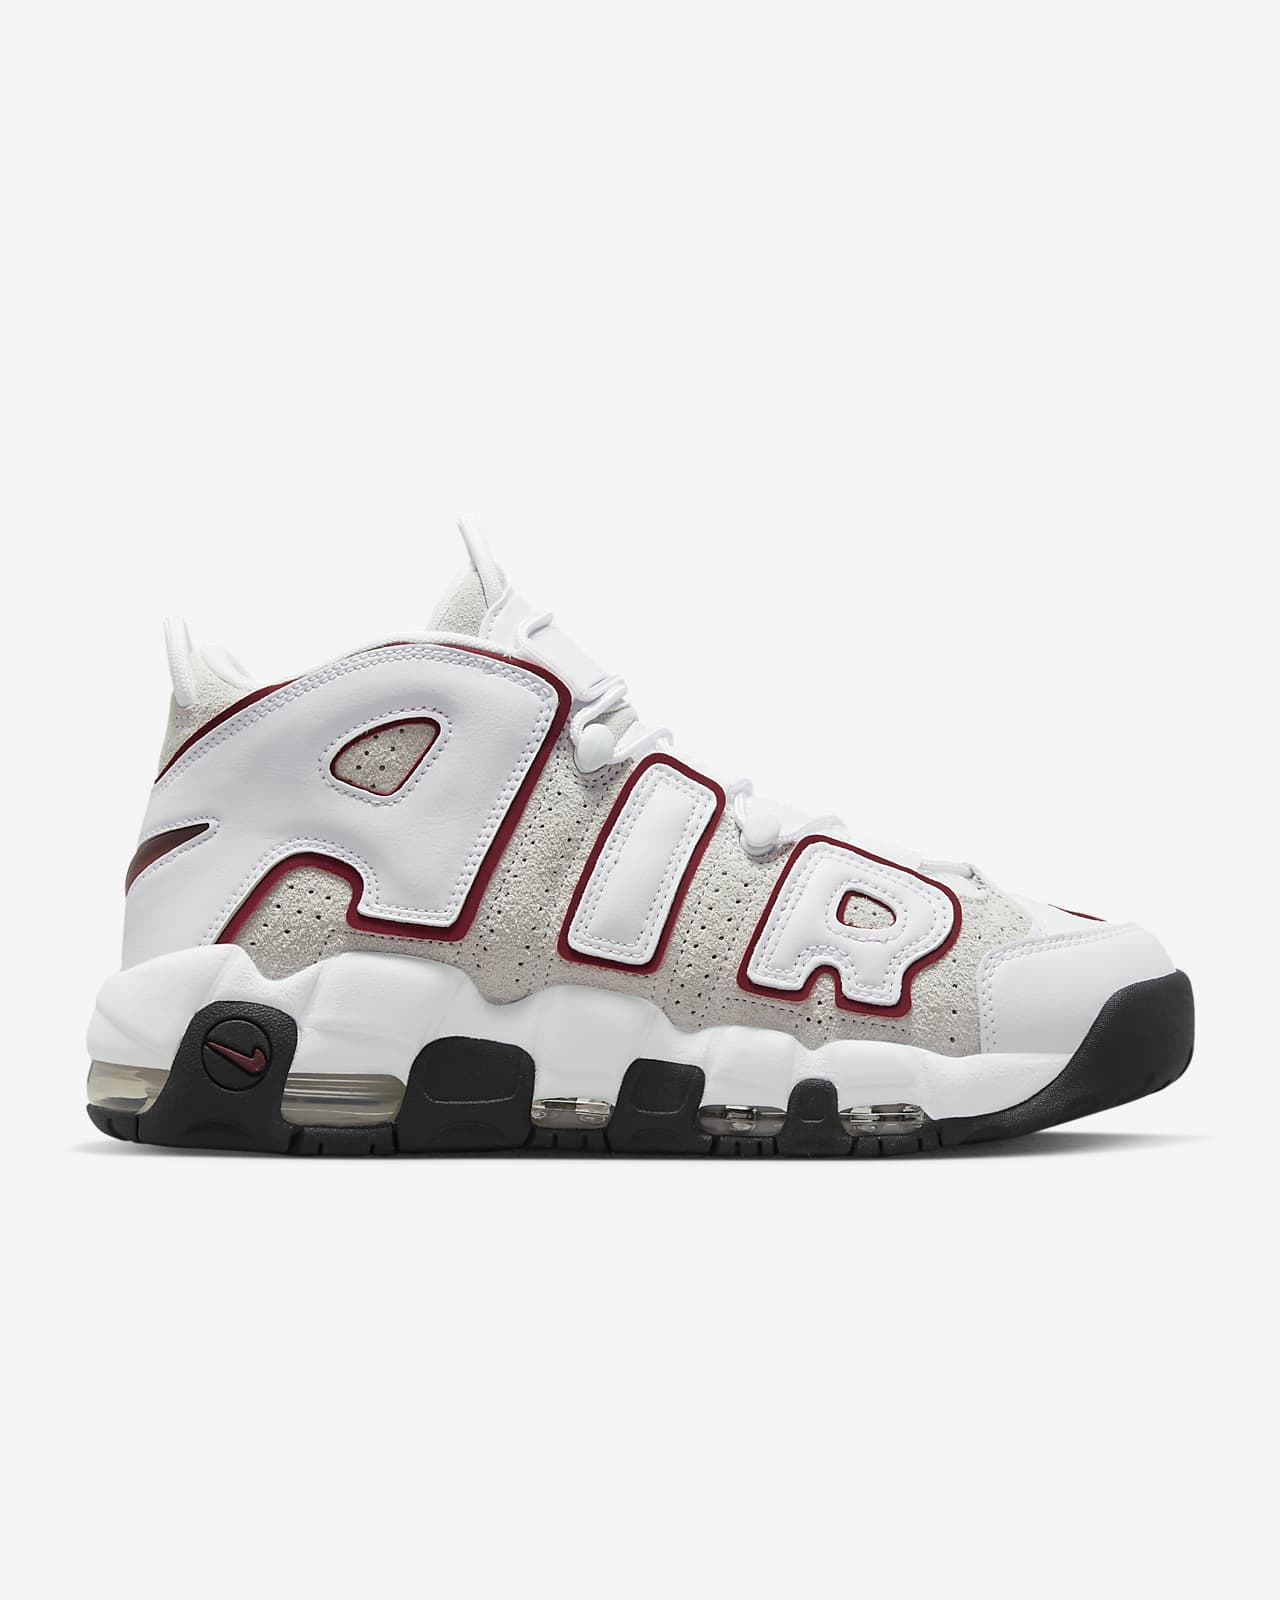 Nike Air nike air more uptempo red and white More Uptempo '96 Men's Shoes. Nike SA